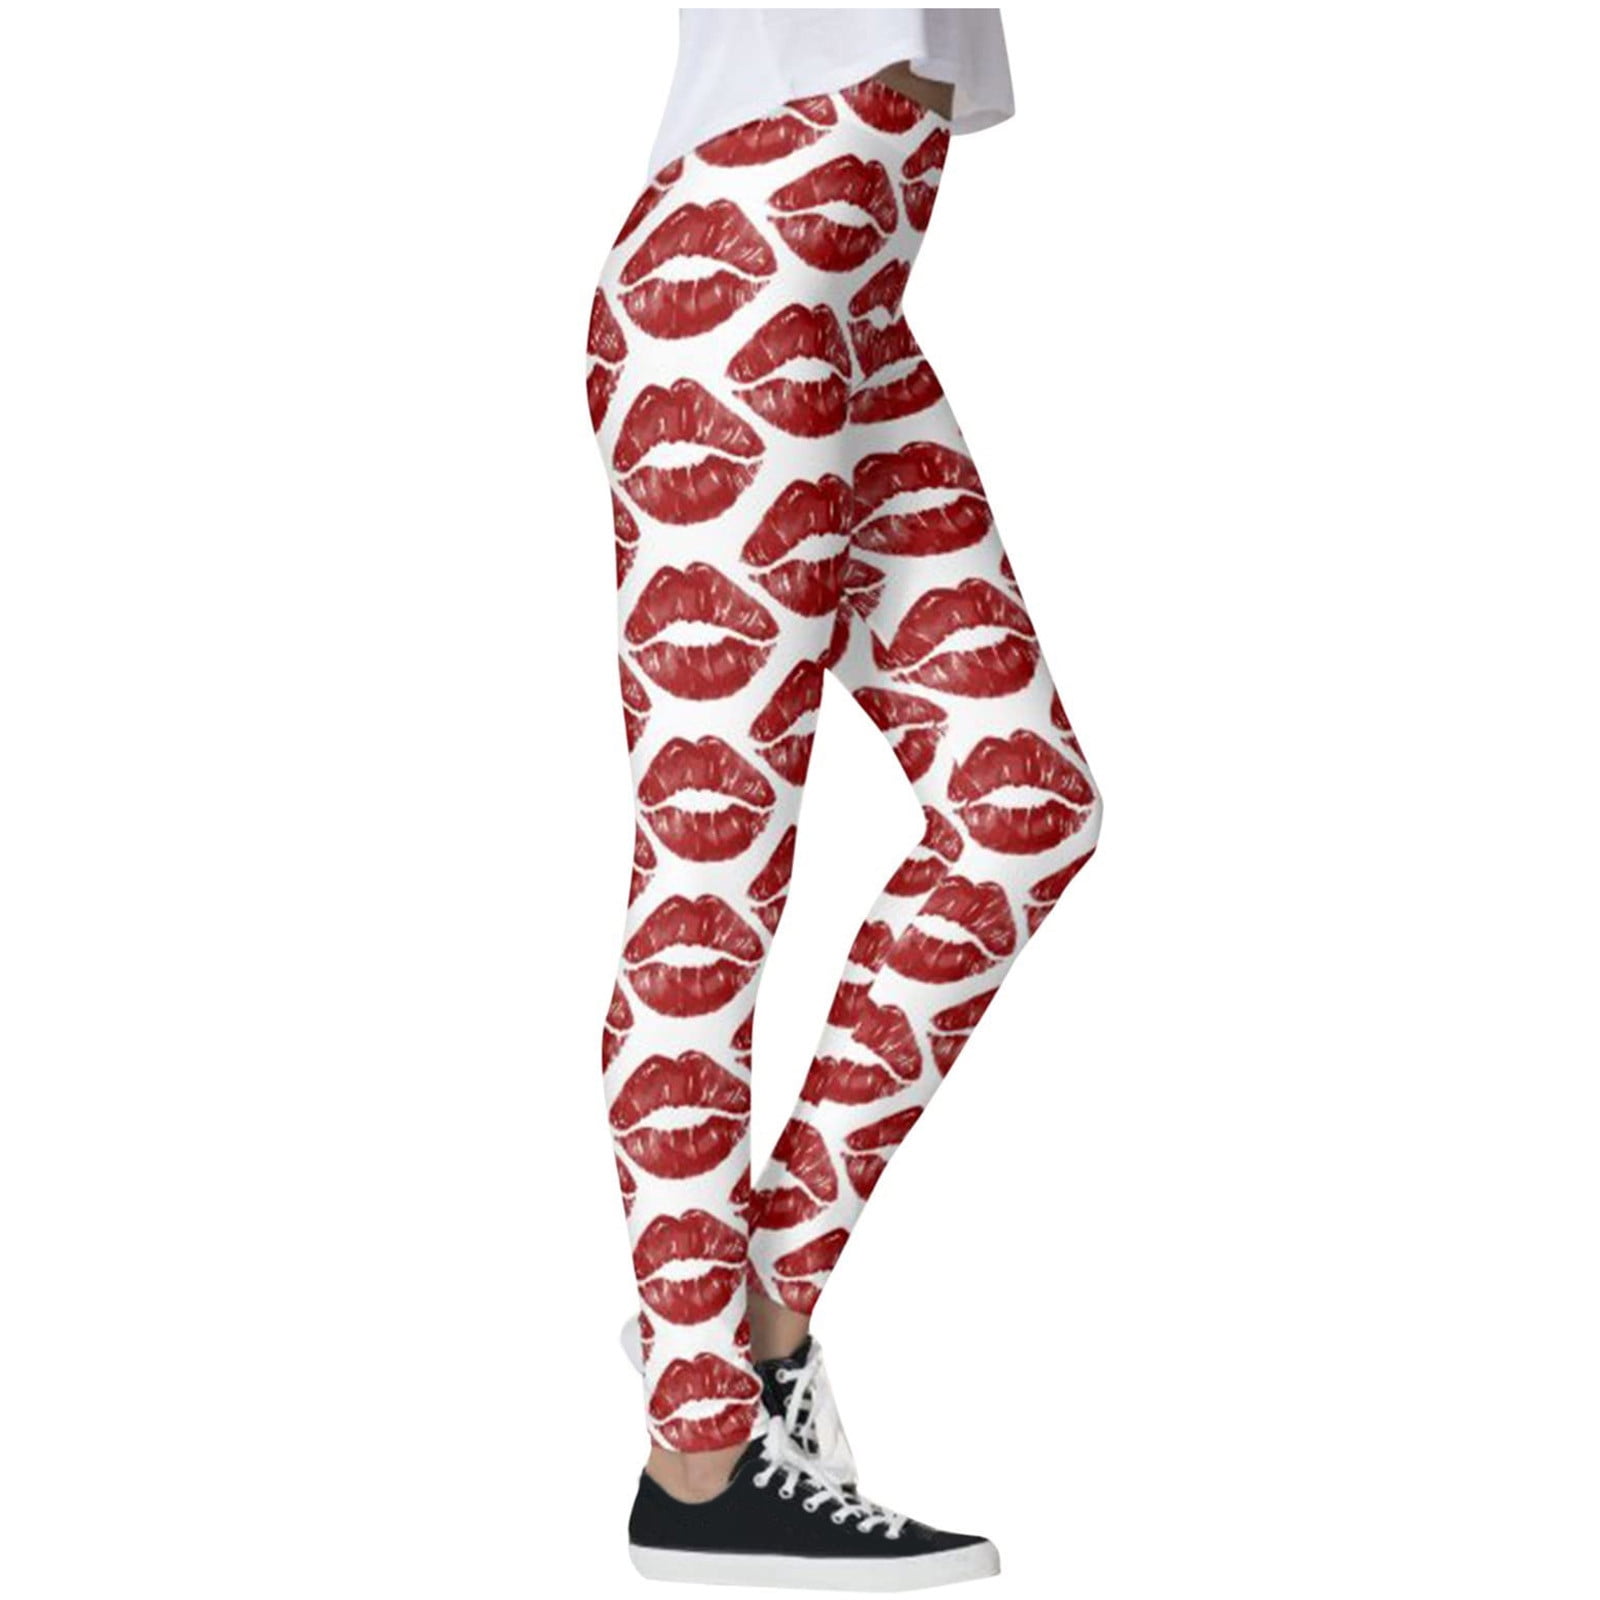 YWDJ Tights for Women Gym Heart High Waist Casual Running Sports  Yogalicious Print Patterned Utility Dressy Everyday Soft Love Printing  Broken Elastic